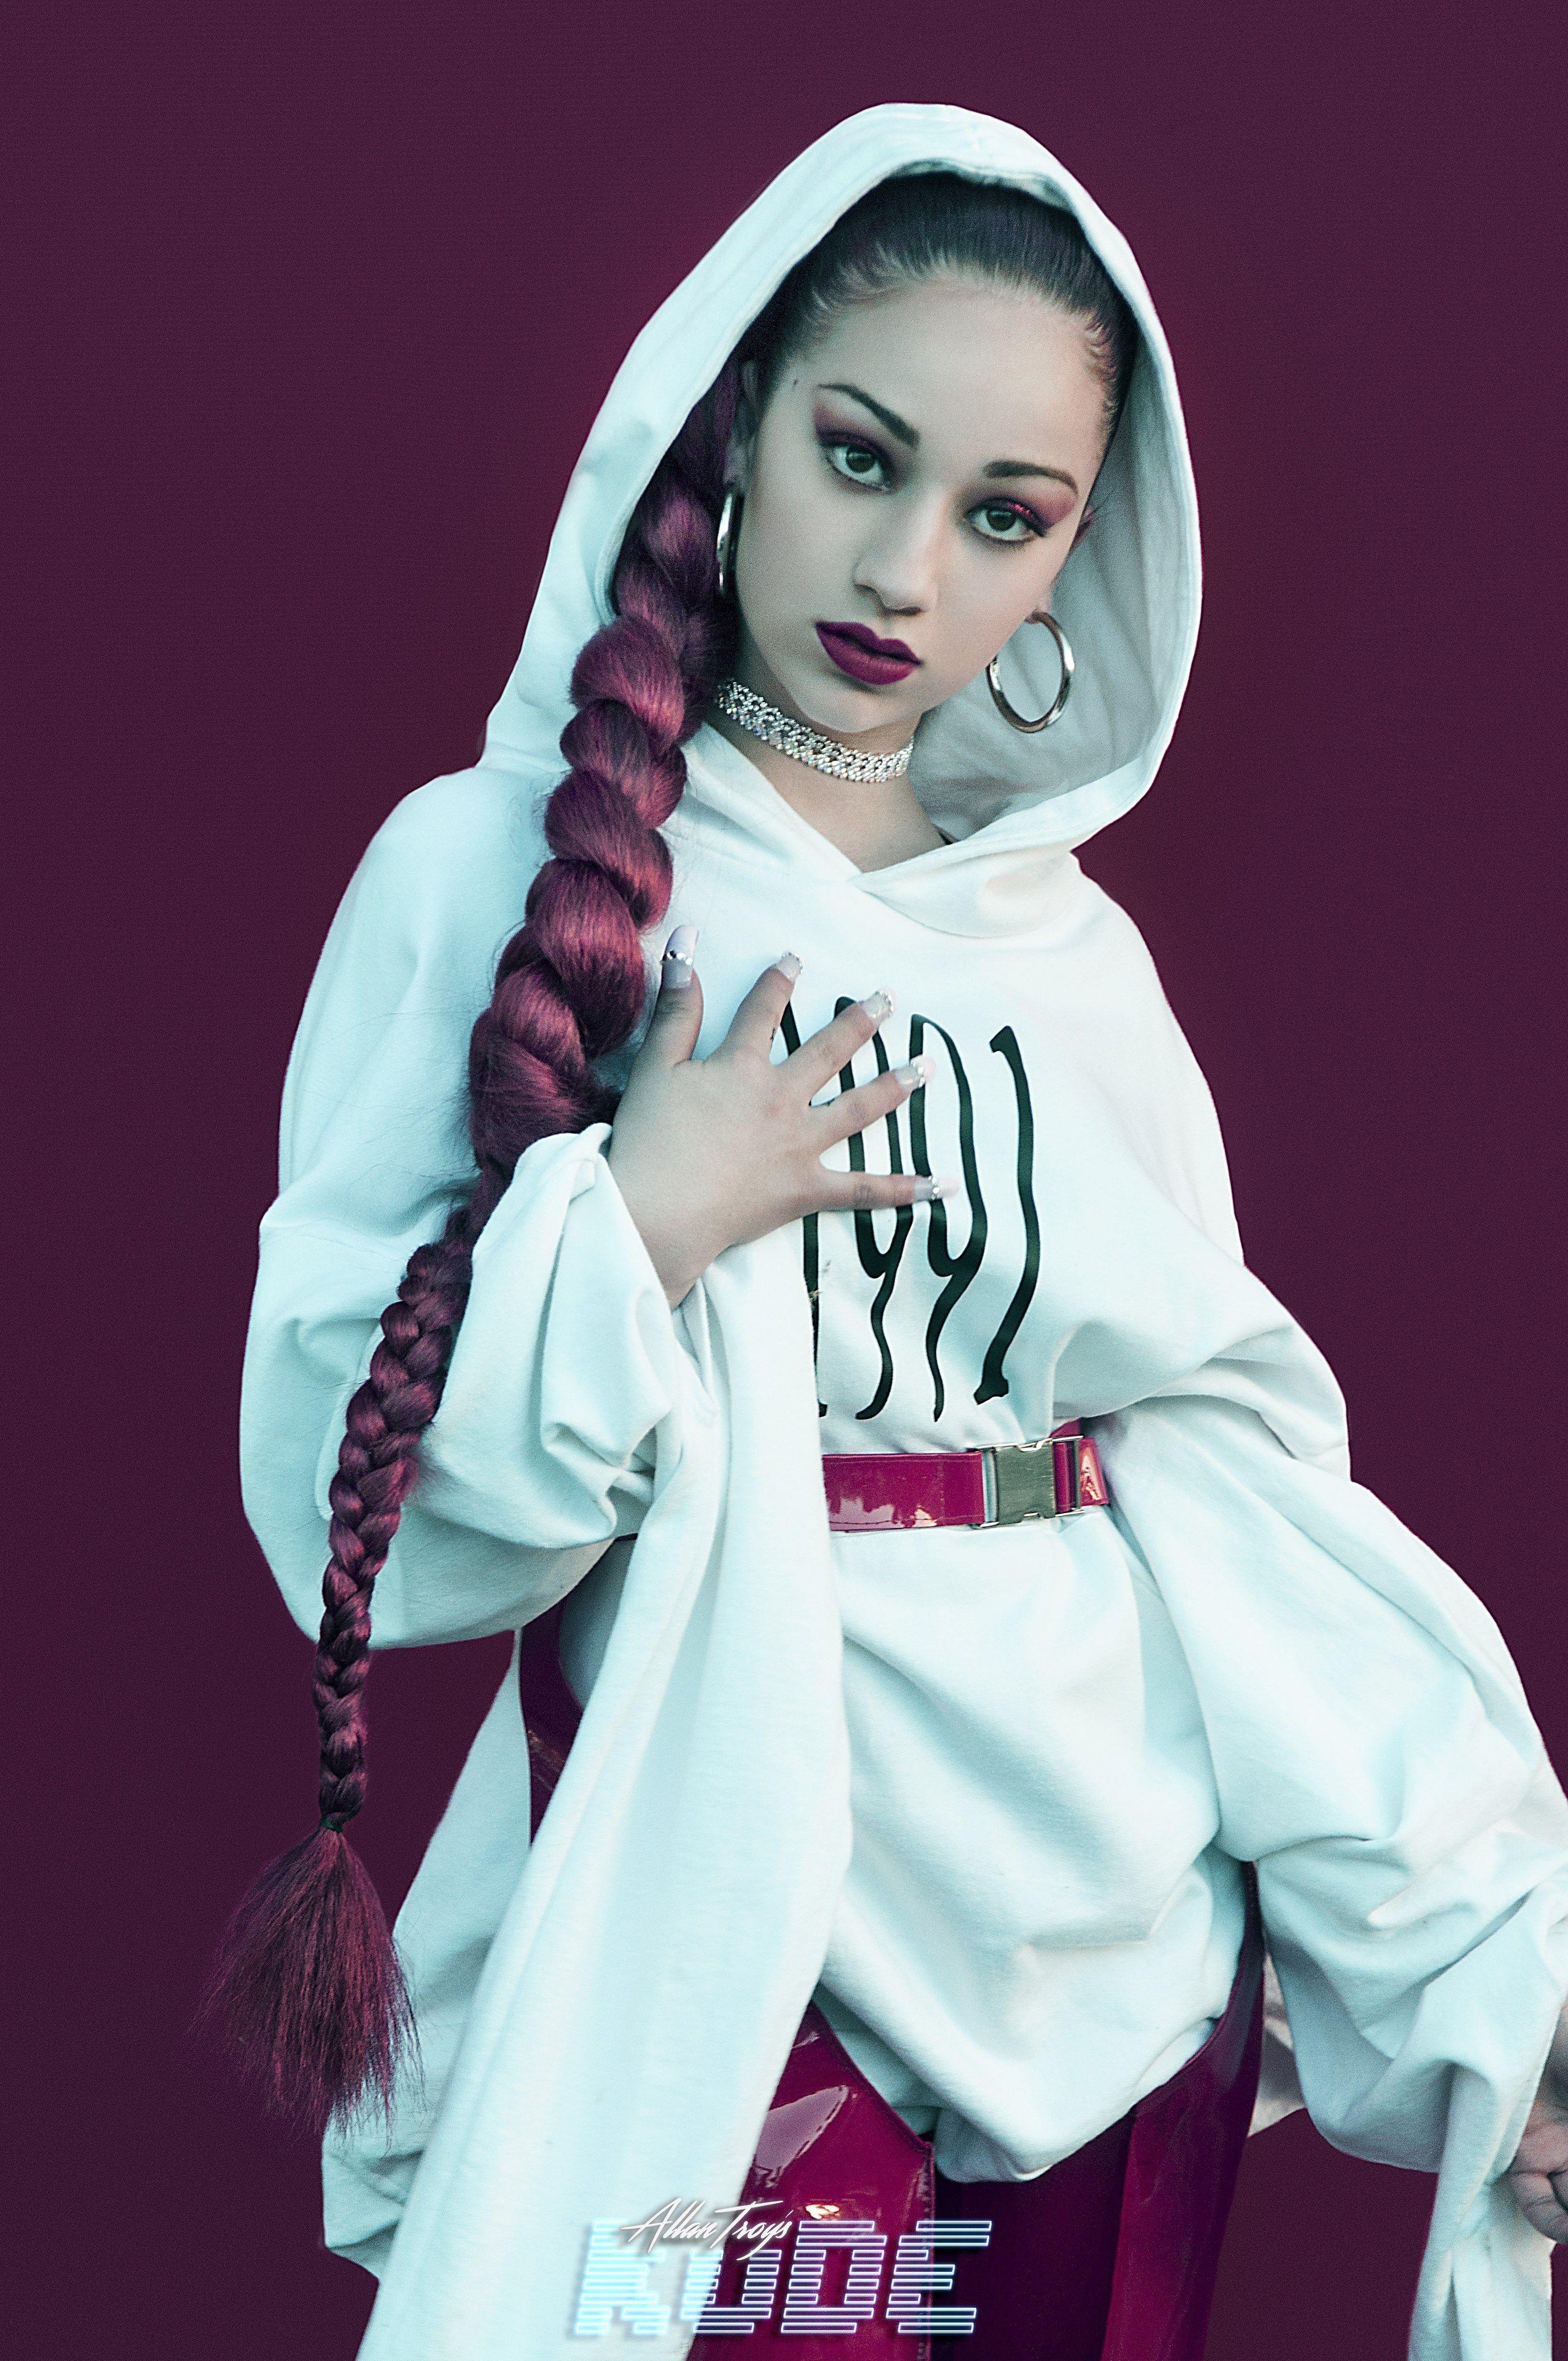 Bhad Bhabie shakes off the haters to pursue rap success  newscomau   Australias leading news site